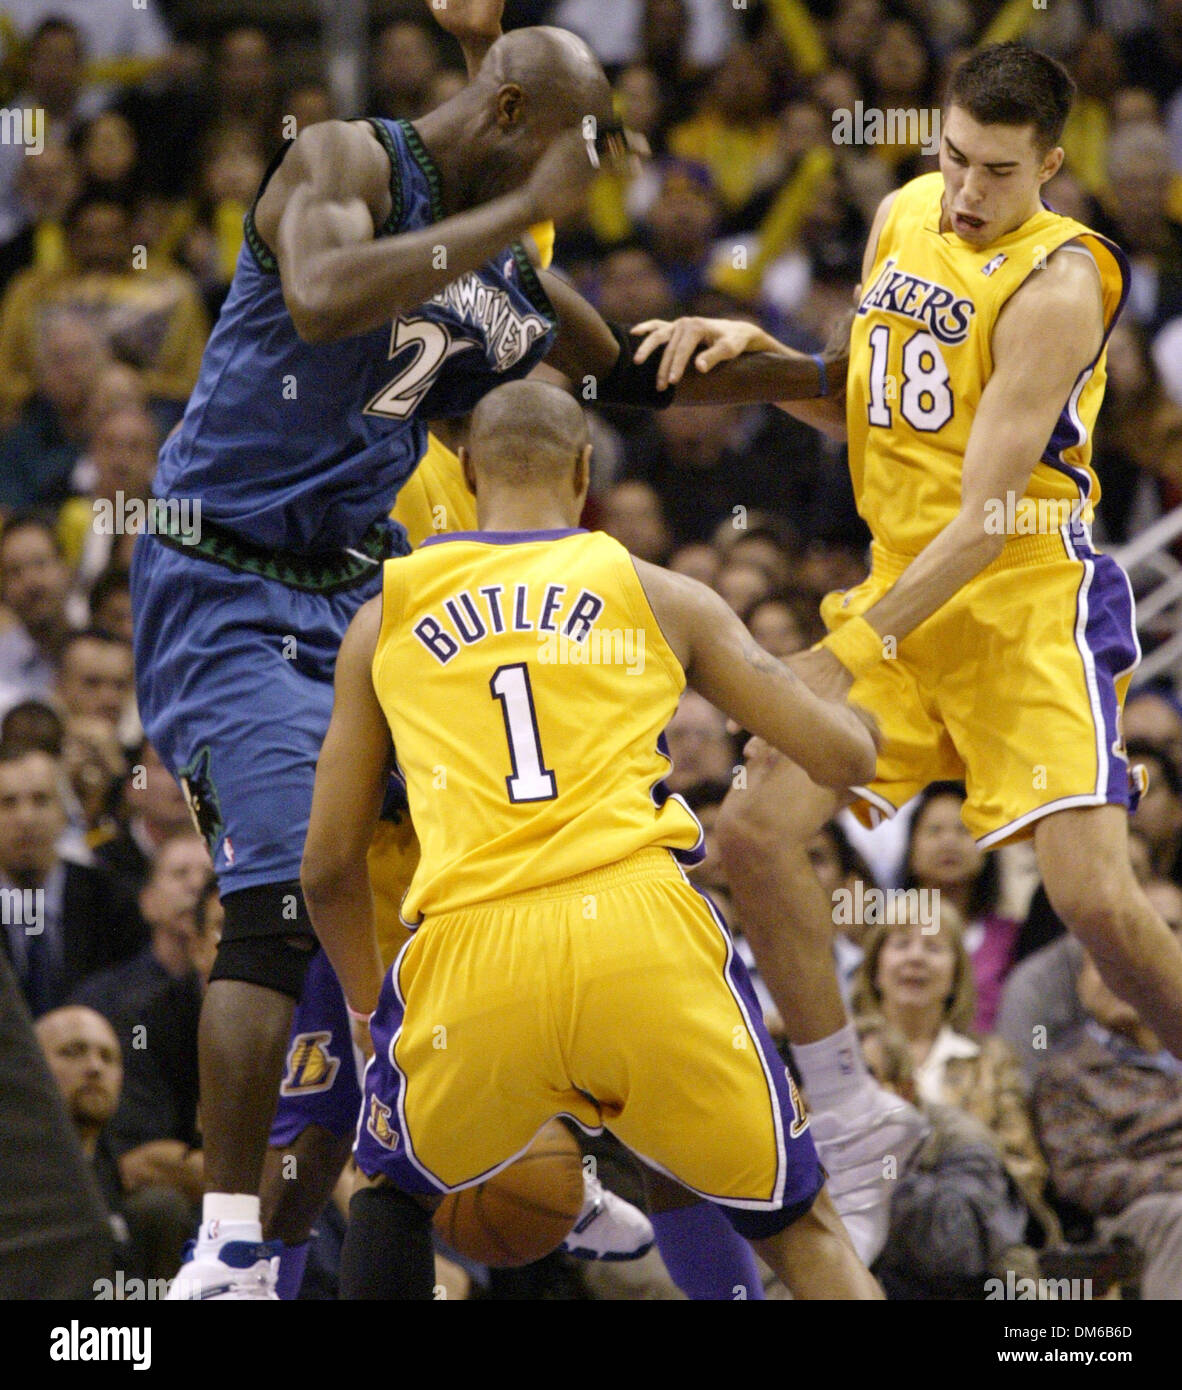 Jan 19, 2005; Los Angeles, CA, USA; Minnesota Timberwolves (20) KEVIN GARNETT looses the ball against  (1) CARON BUTLER and  (18) SASHA VUJACIC during the second half of the Minnesota Timberwolves game against Los Angeles Lakers at the Staples Center in Los Angeles California on Wednesday January 19, 2005. Stock Photo